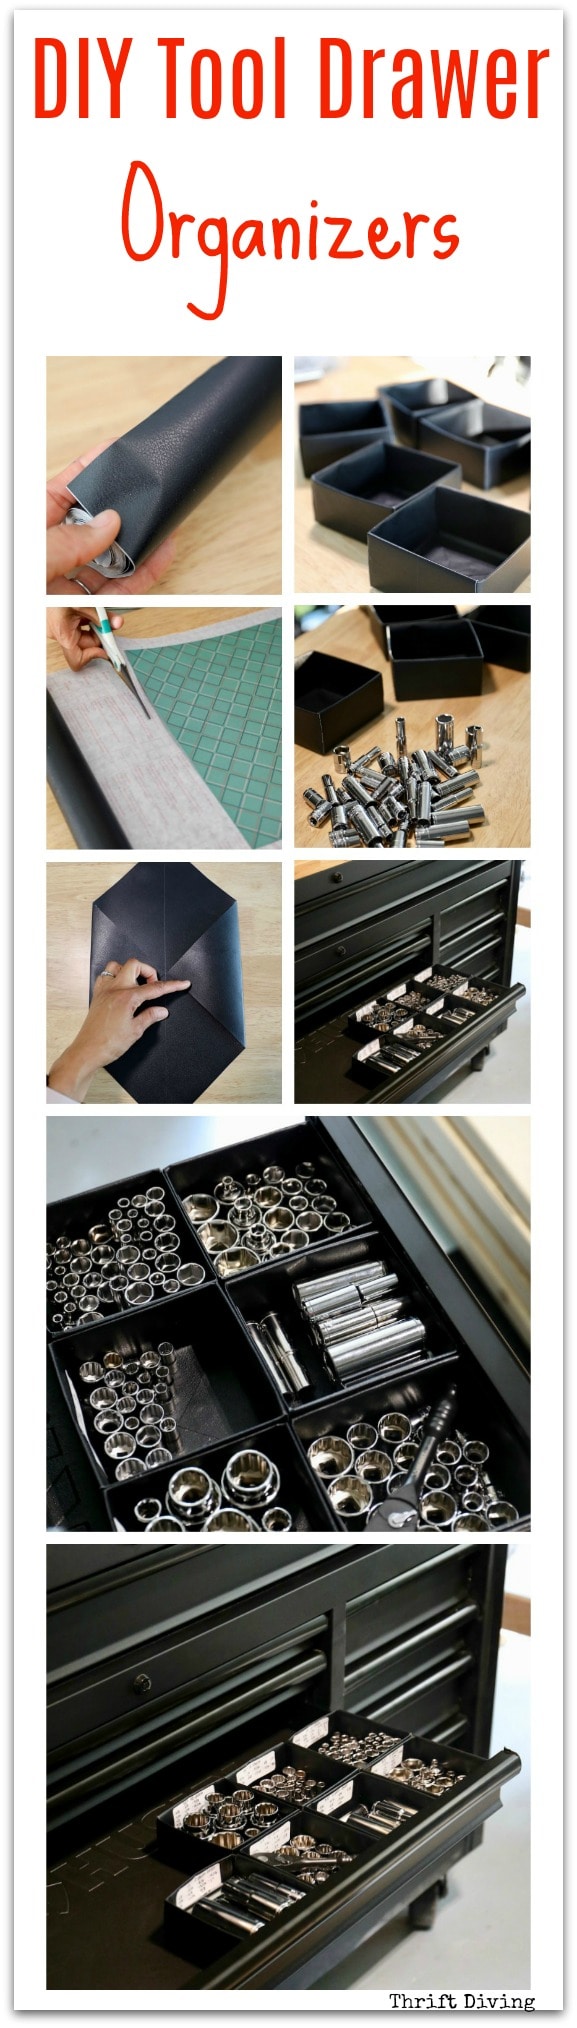 DIY Tool Drawer Organizers - DIY Faux Leather Box - Use 12 x 12 scrapbook paper and faux leather Con-Tact paper to create a bunch of faux leather boxes that can be used to organize tools and small pieces in your tool drawer! Perfect for panty drawers, office drawers, junk drawers, jewelry boxes, and more! - Thrift Diving